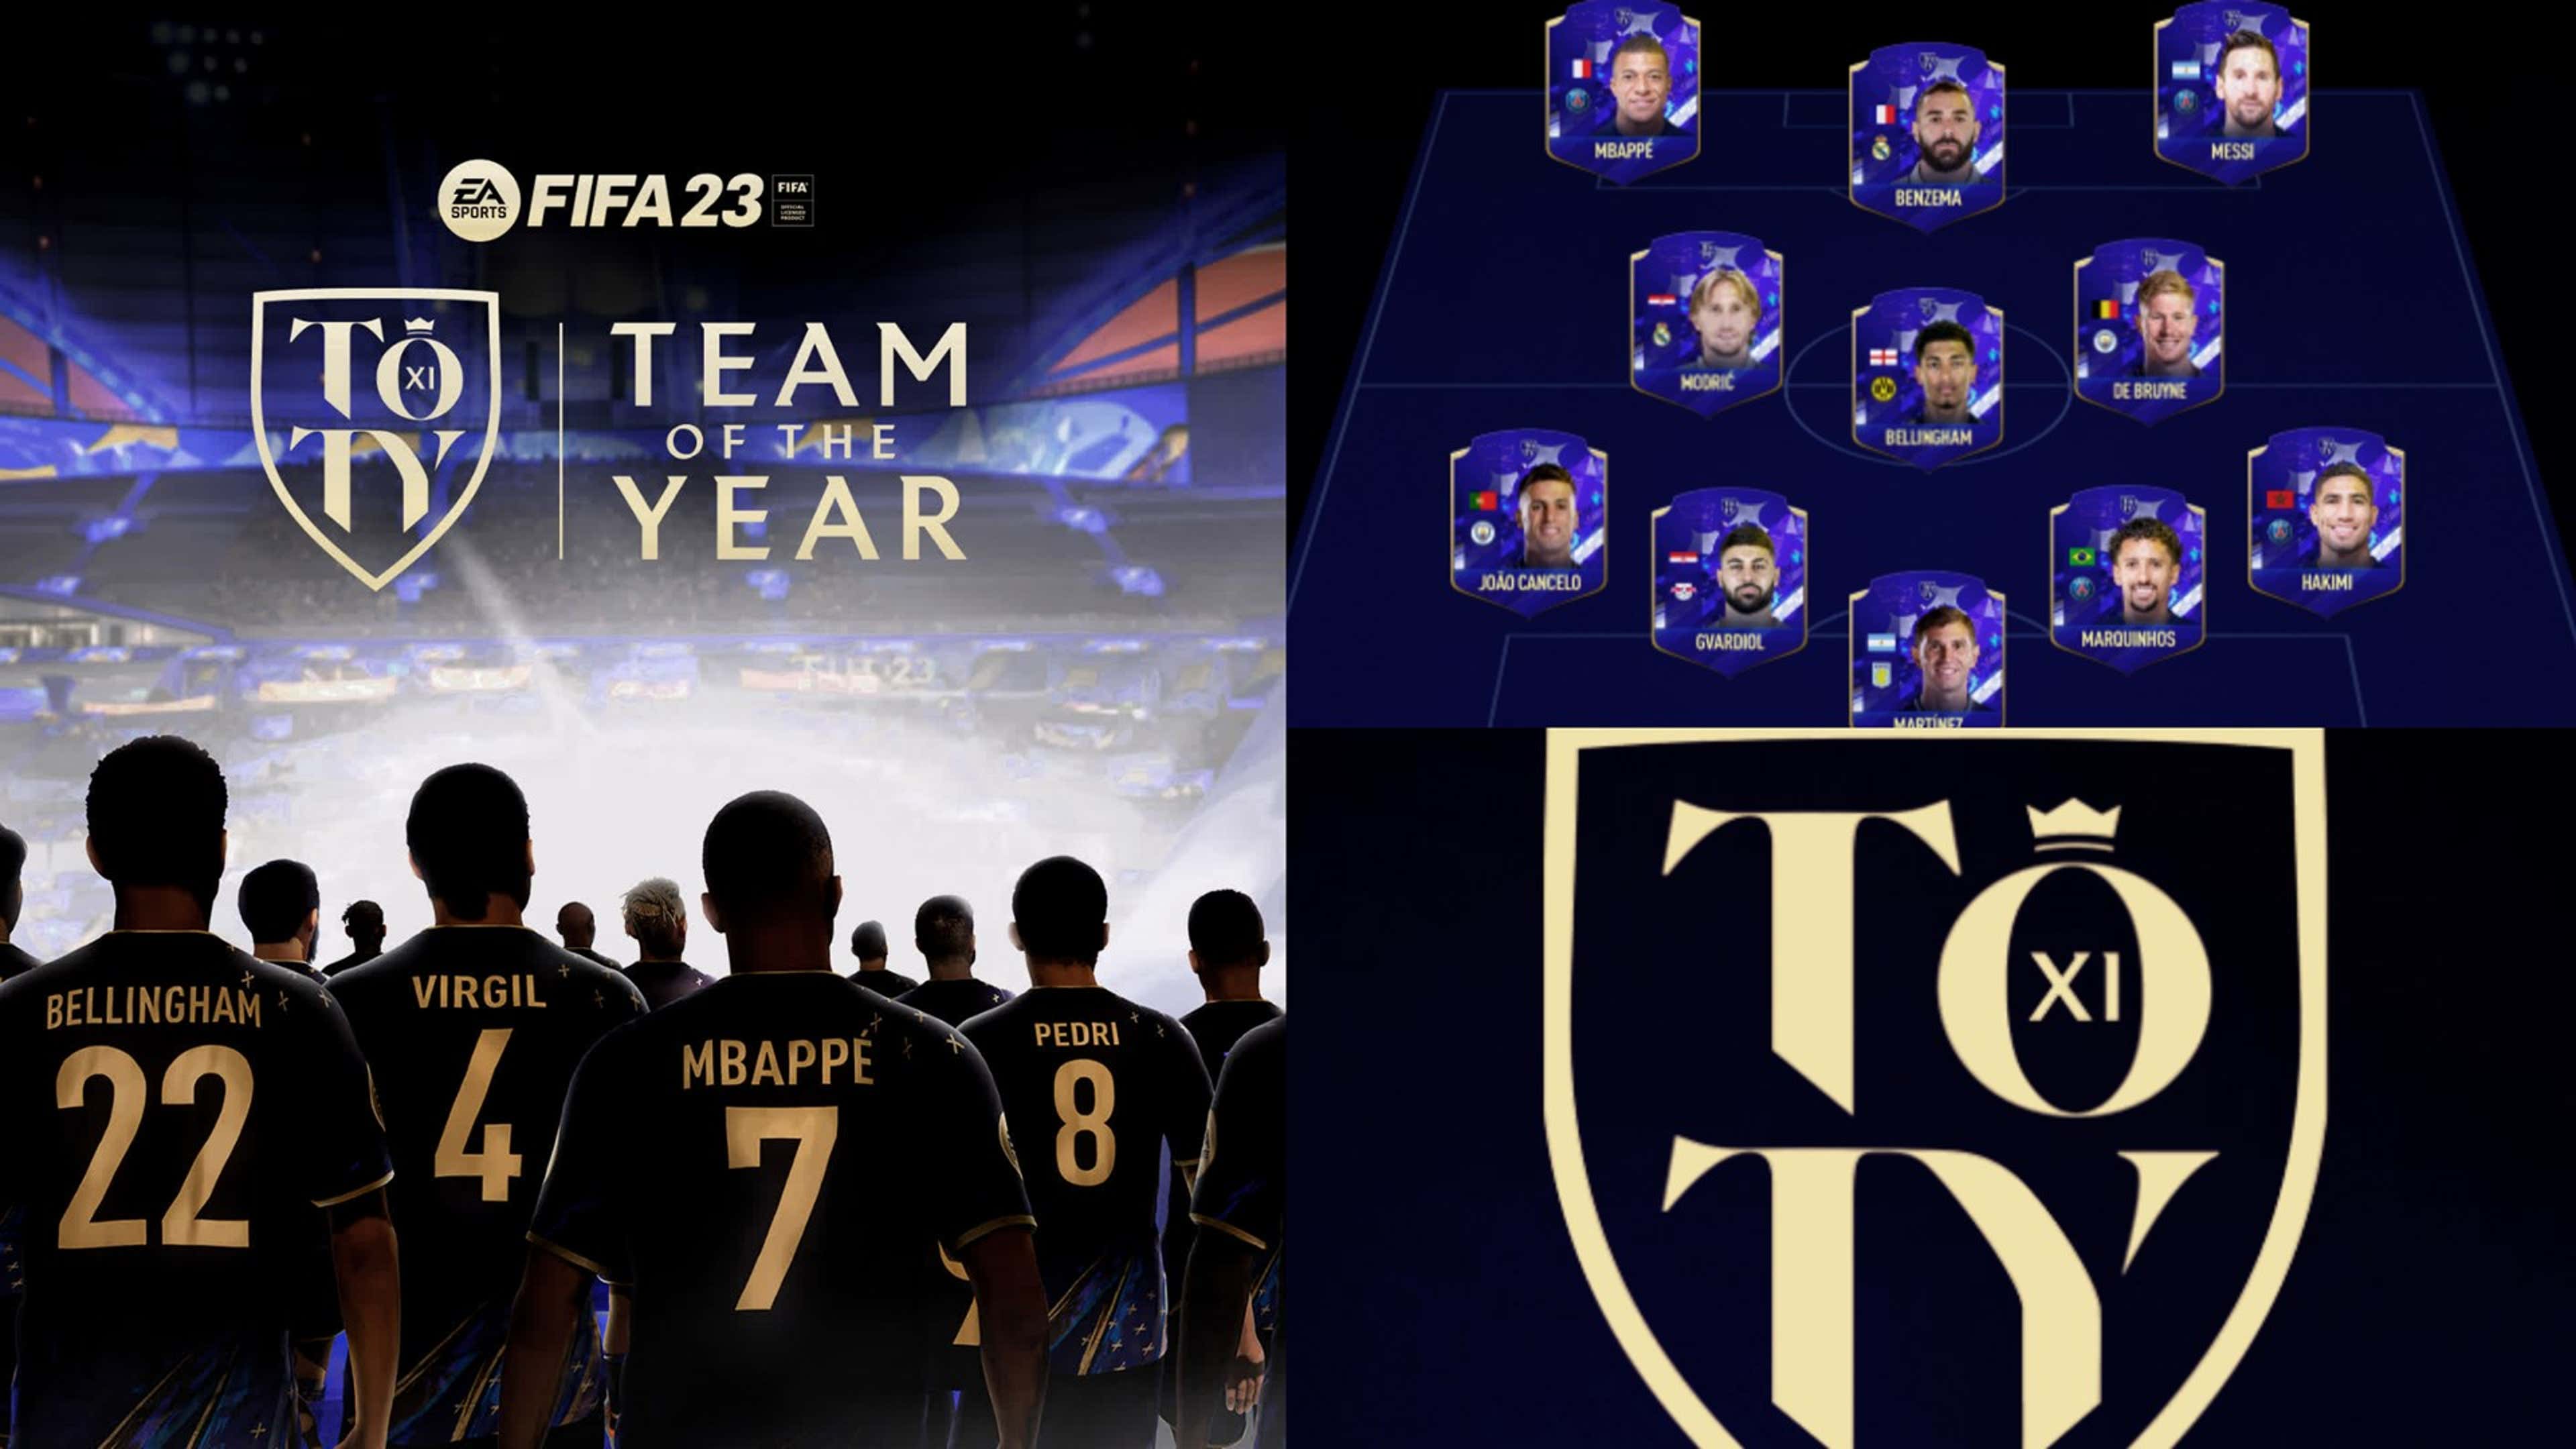 TOTY FIFA 22 released: Mbappe, Messi & others on FUT Team of the